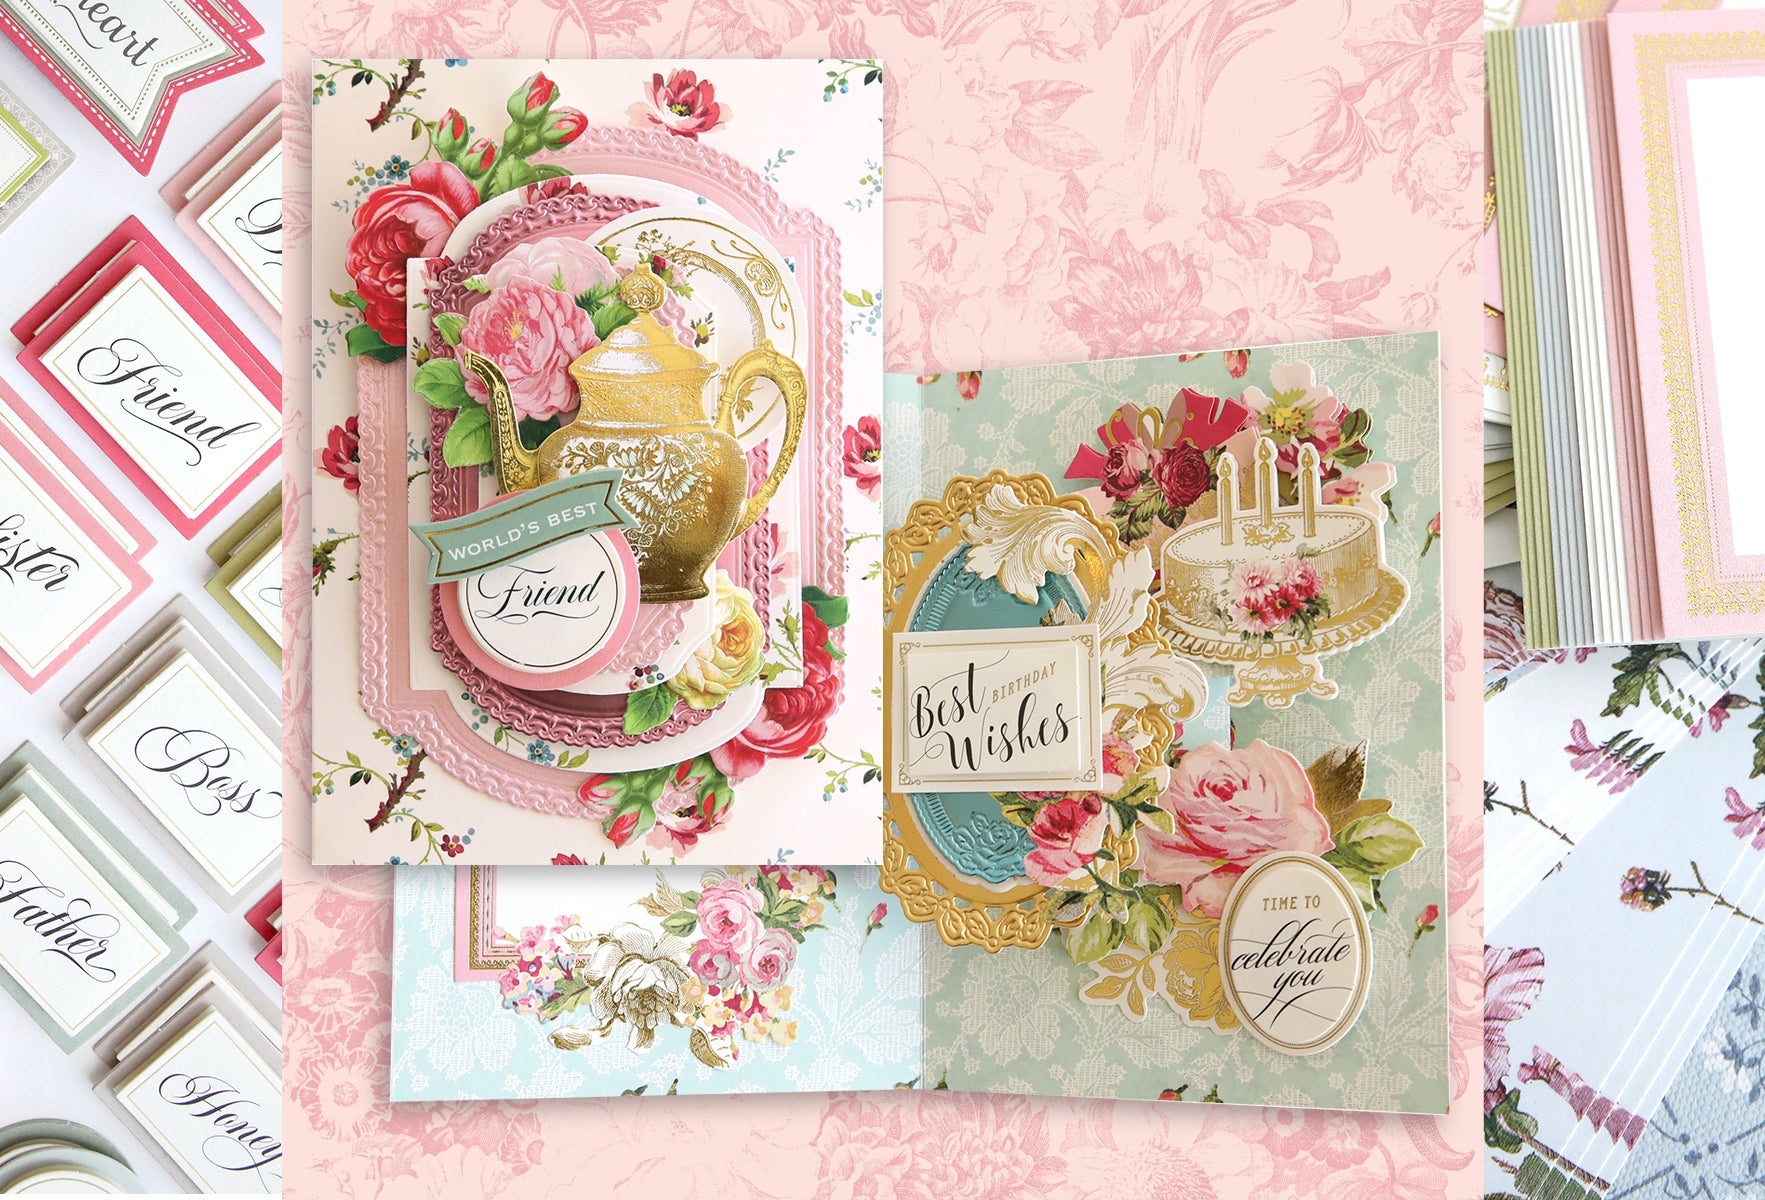 Four ornate greeting cards with floral designs, displaying messages like "world's best friend" and "best wishes," arranged on a patterned background.